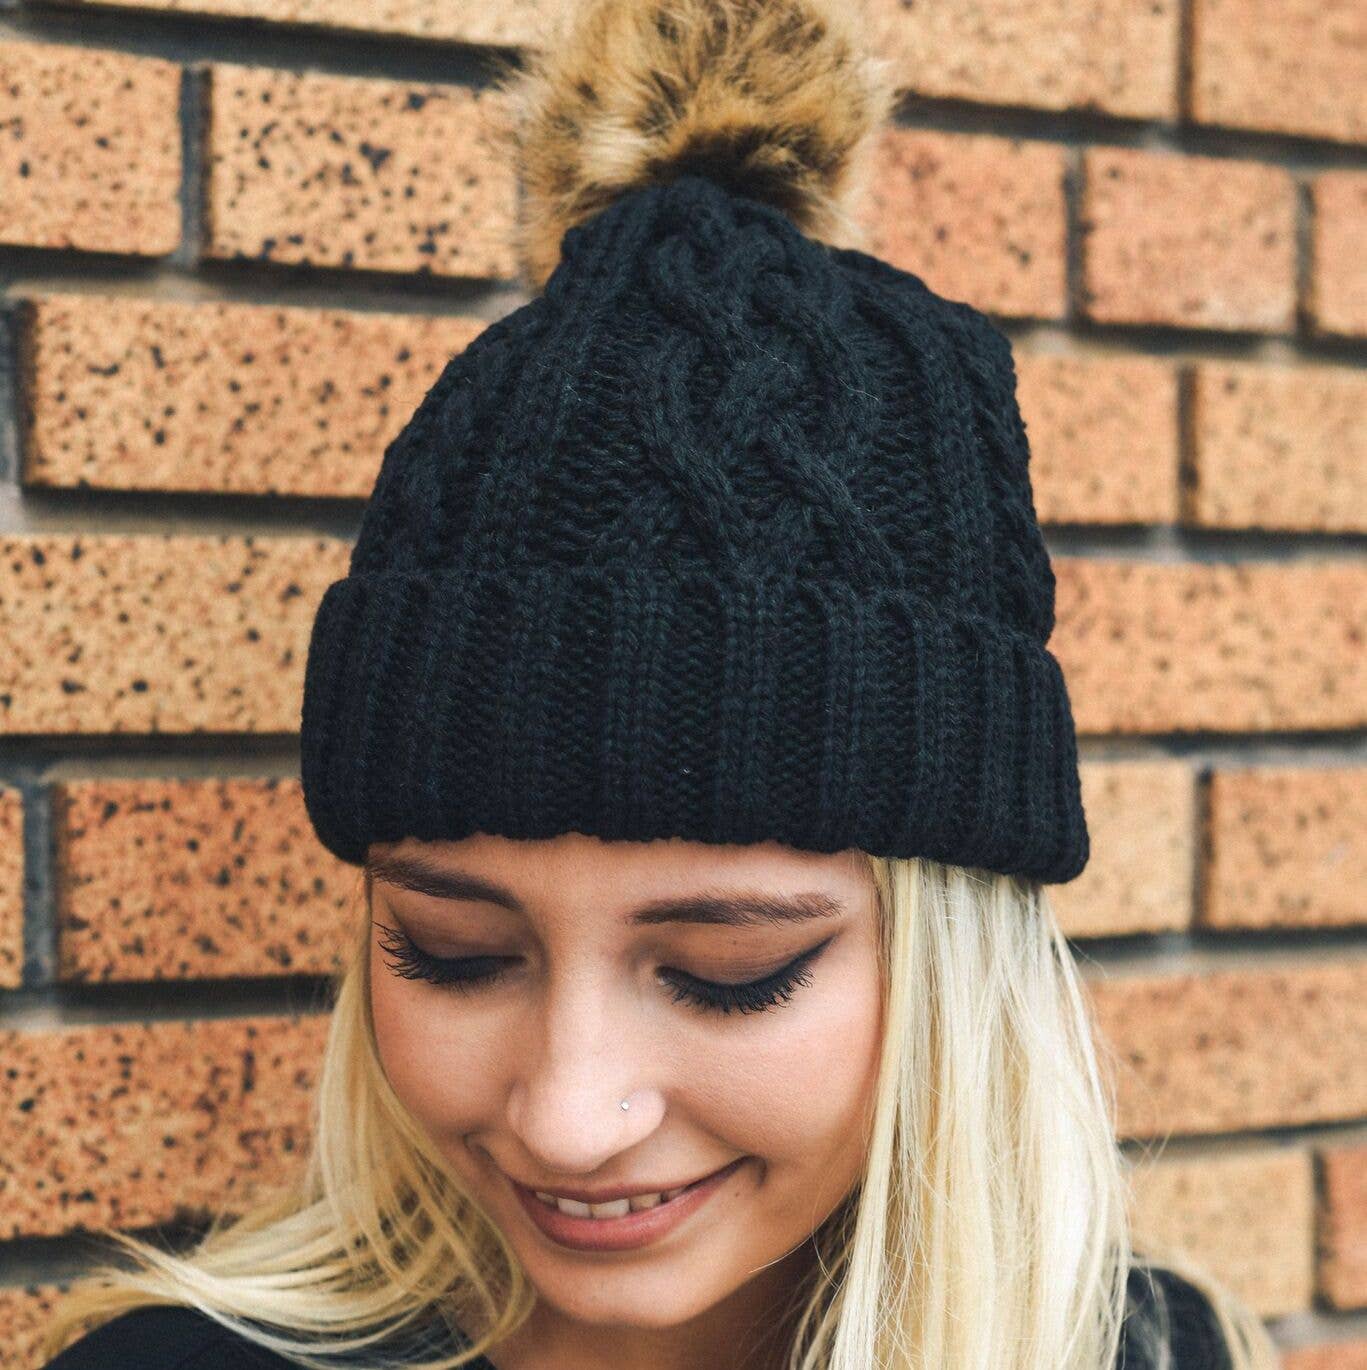 Cable Knit Beanie With Faux Fur Pom - Whimsical Details